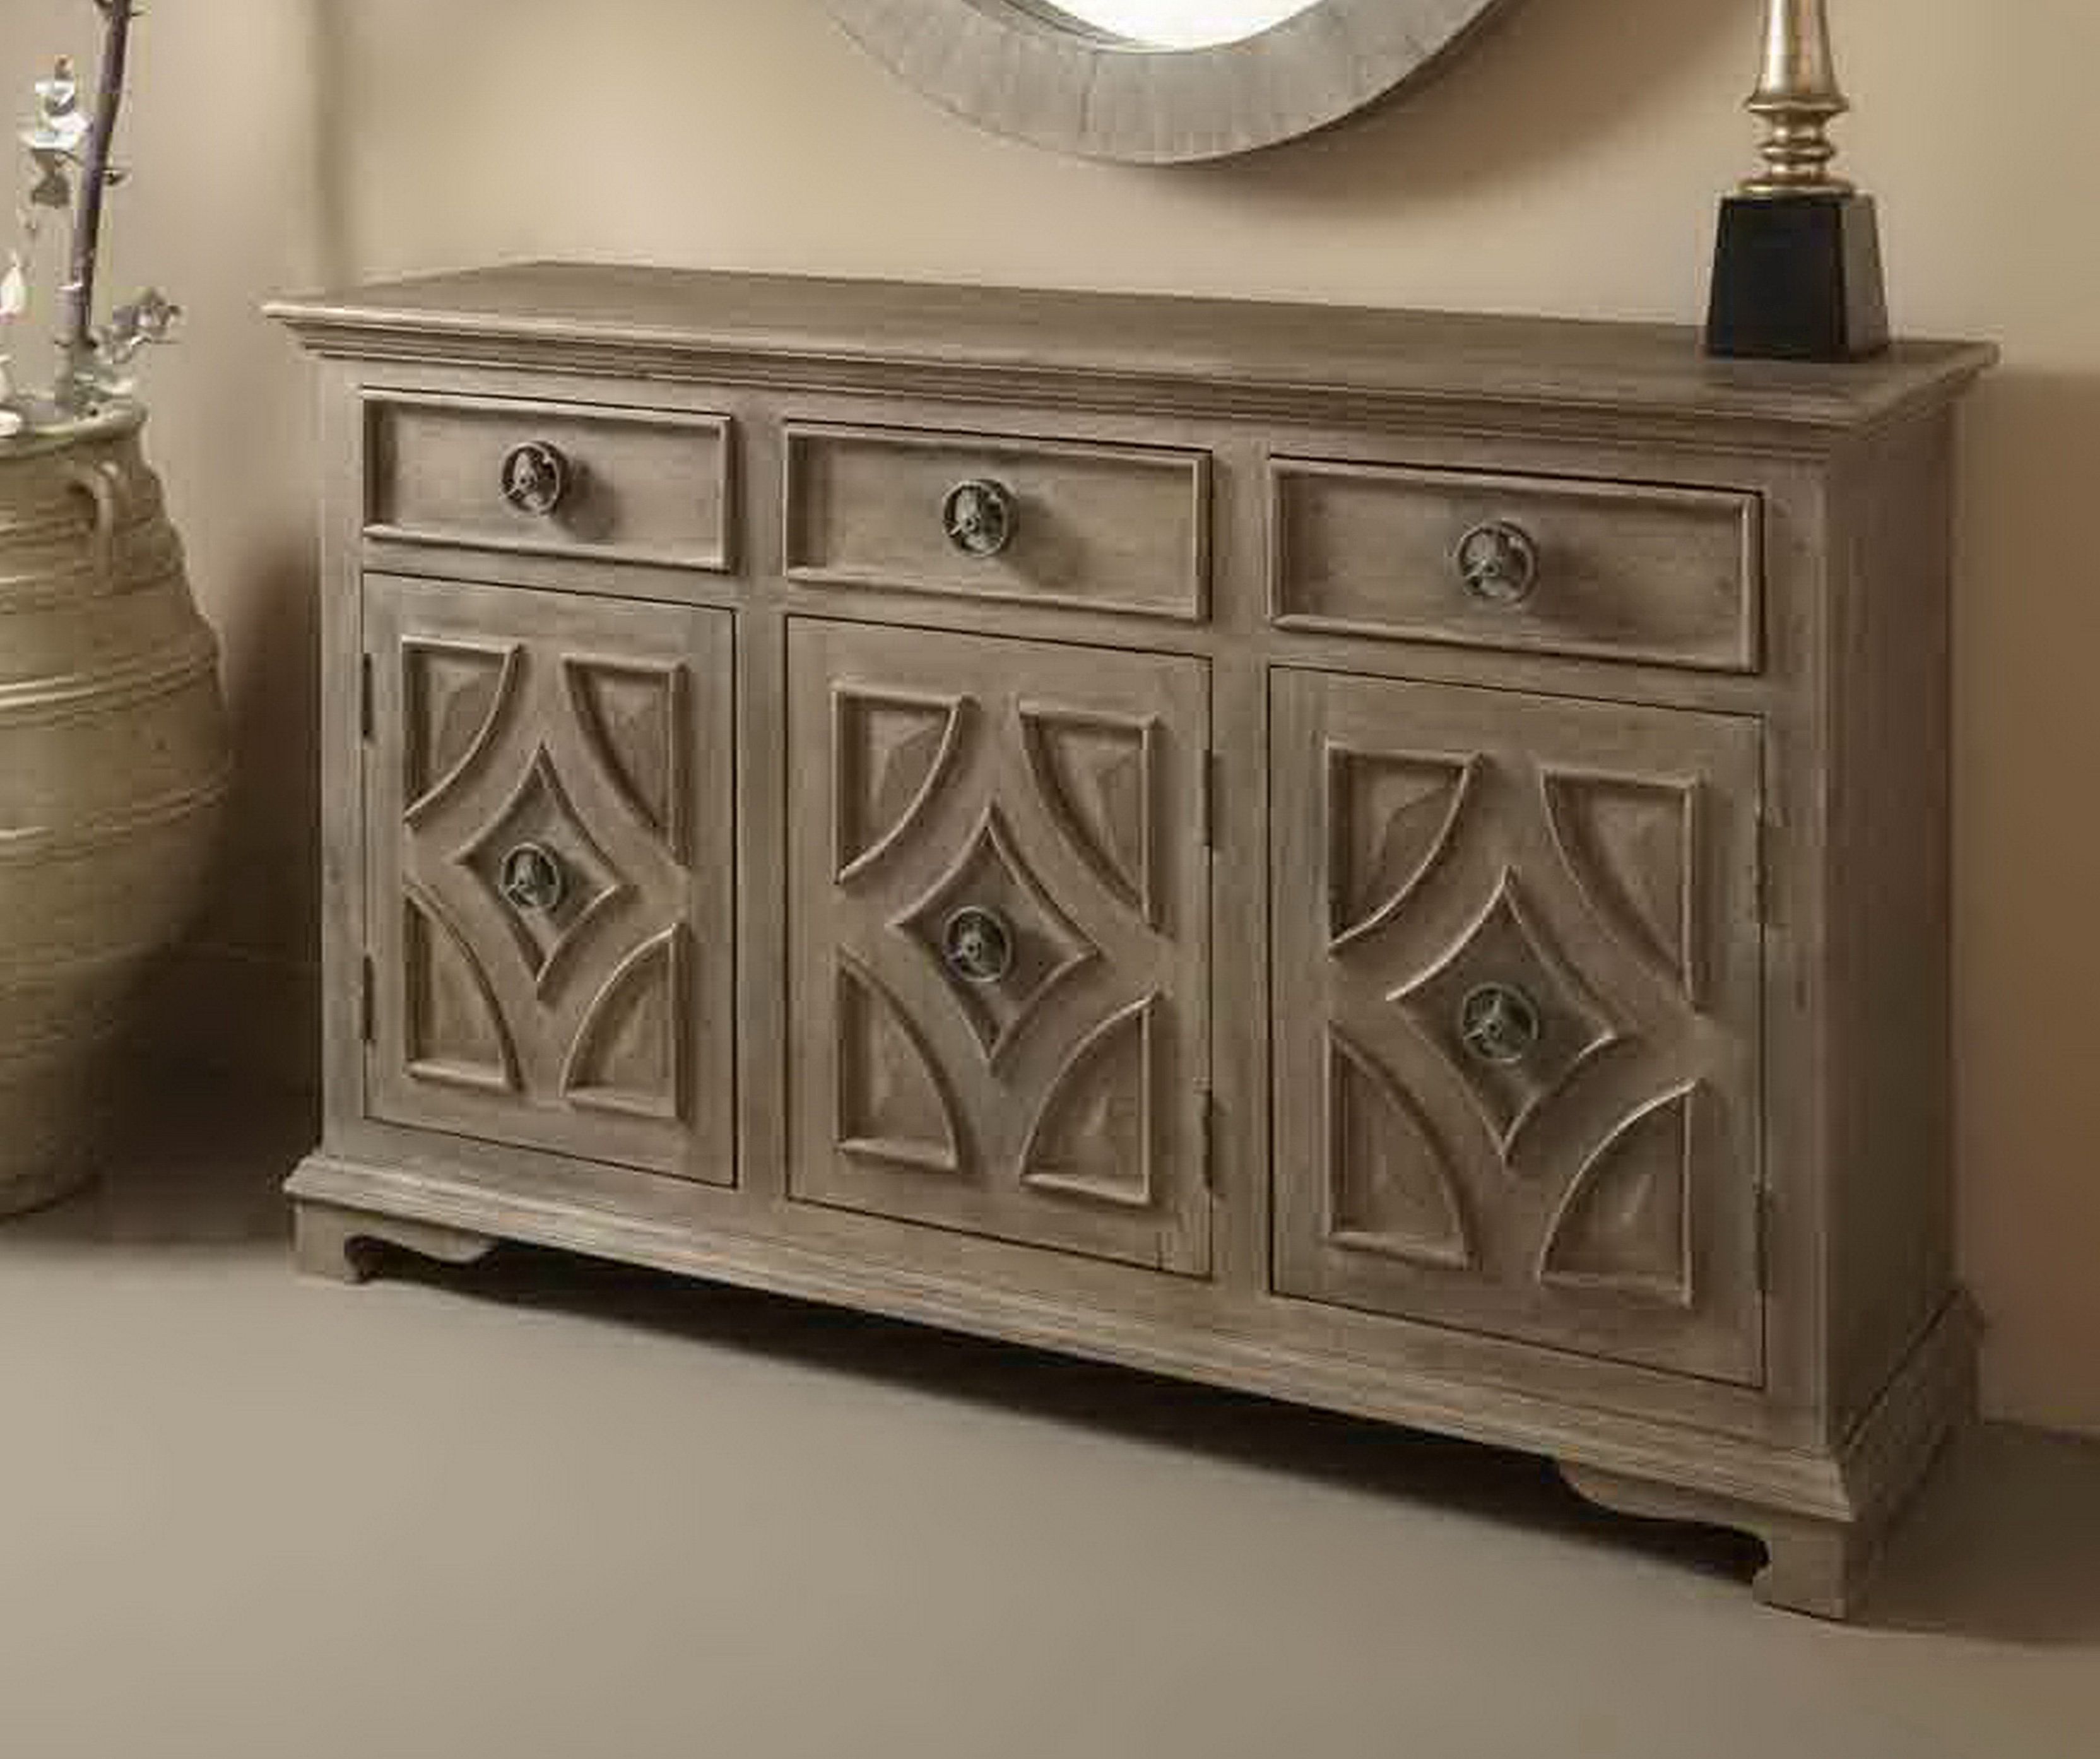 Wrought Iron Sideboard | Wayfair Throughout Most Up To Date Upper Stanton Sideboards (View 6 of 20)